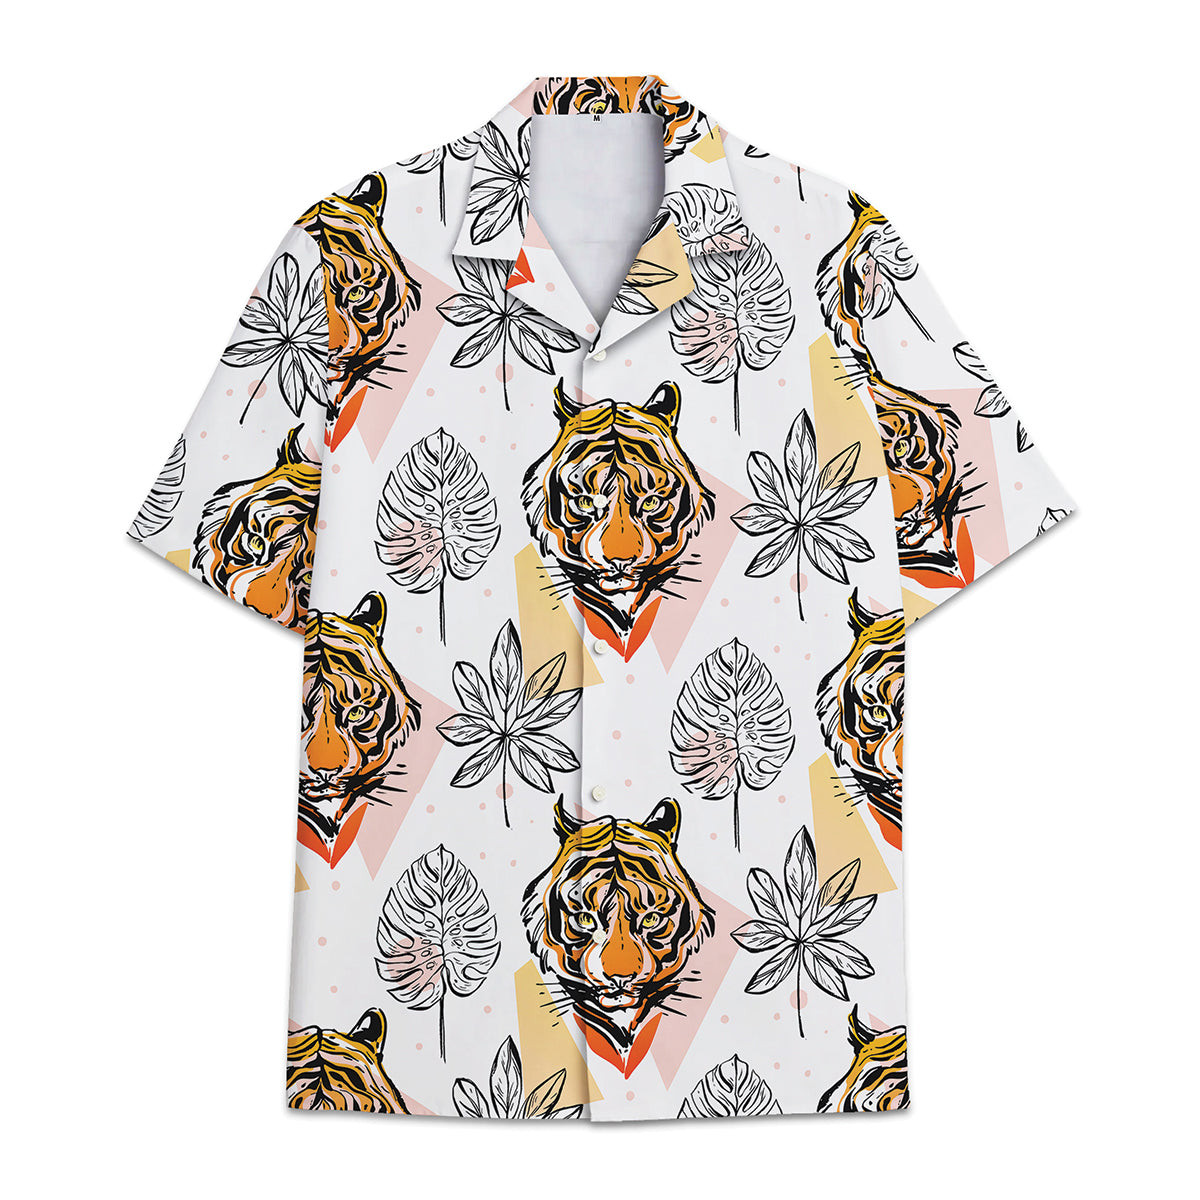 Hawaiian Shirt Tiger Tropical Flower And Leaf Tropical Combined With Animal And Tiger